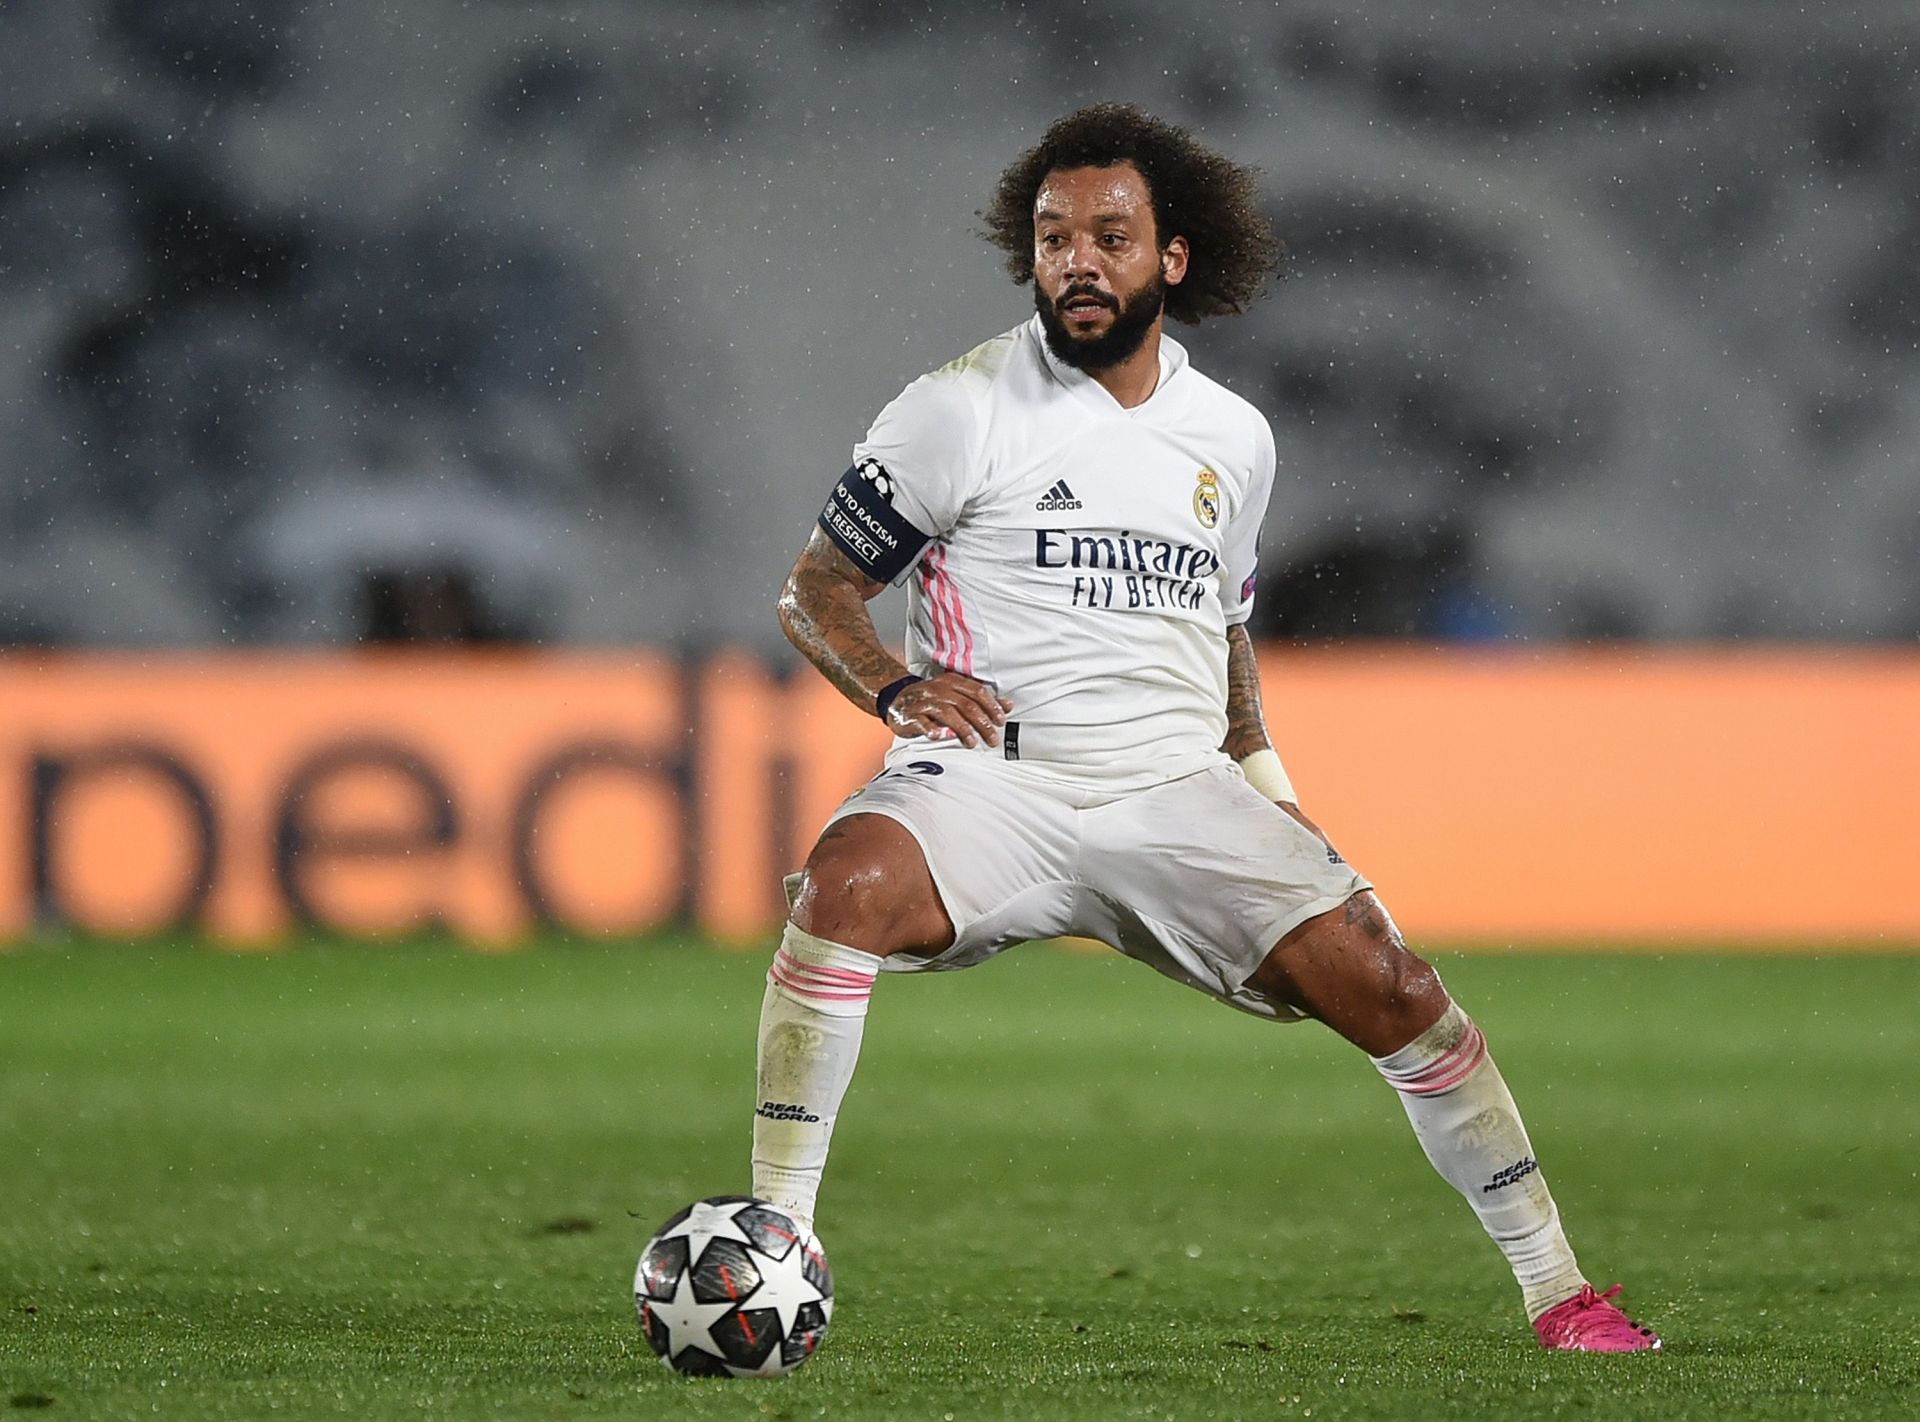 Marcelo in action against Chelsea in the Champions League